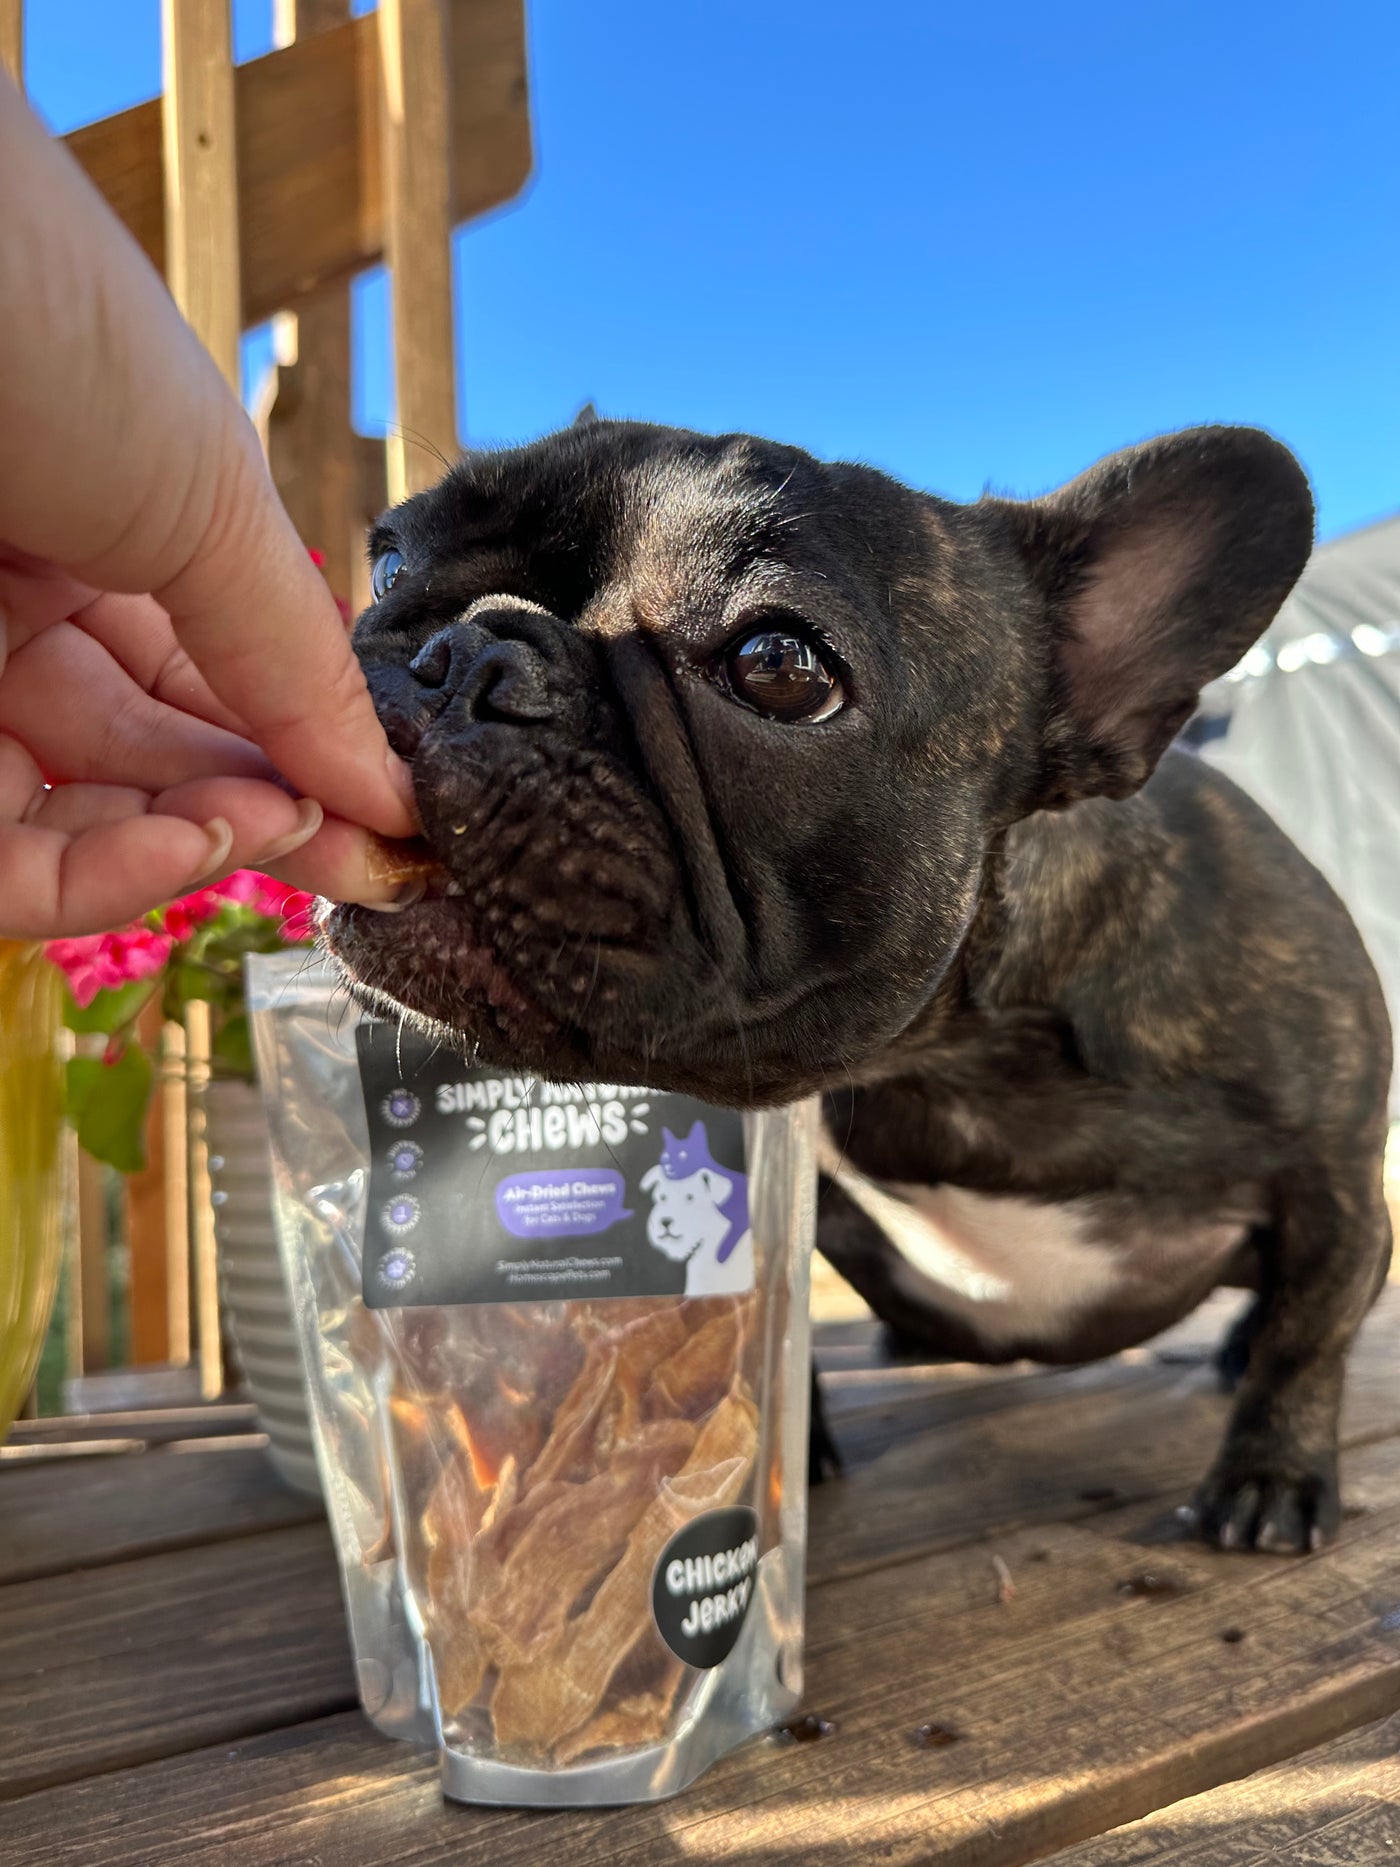 Black Frenchie dog eaging a piece of chicken jerky on a patio | Homescape Pets